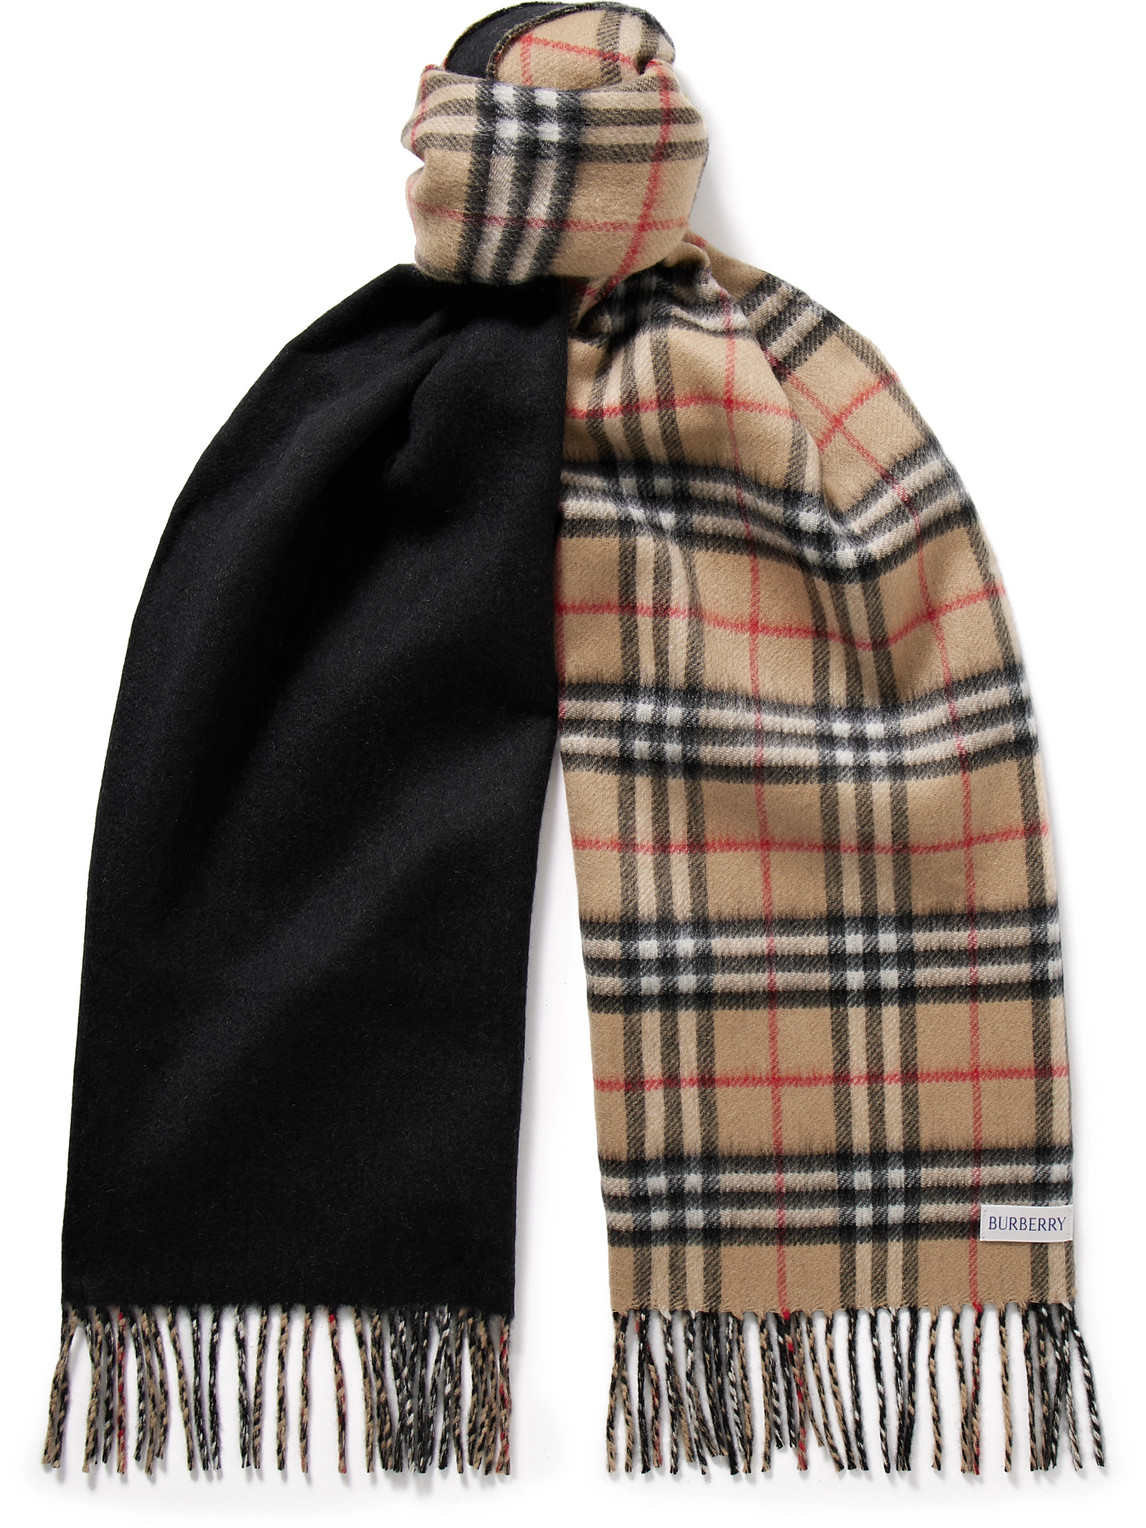 Burberry Reversible Fringed Checked Cashmere Scarf In Black